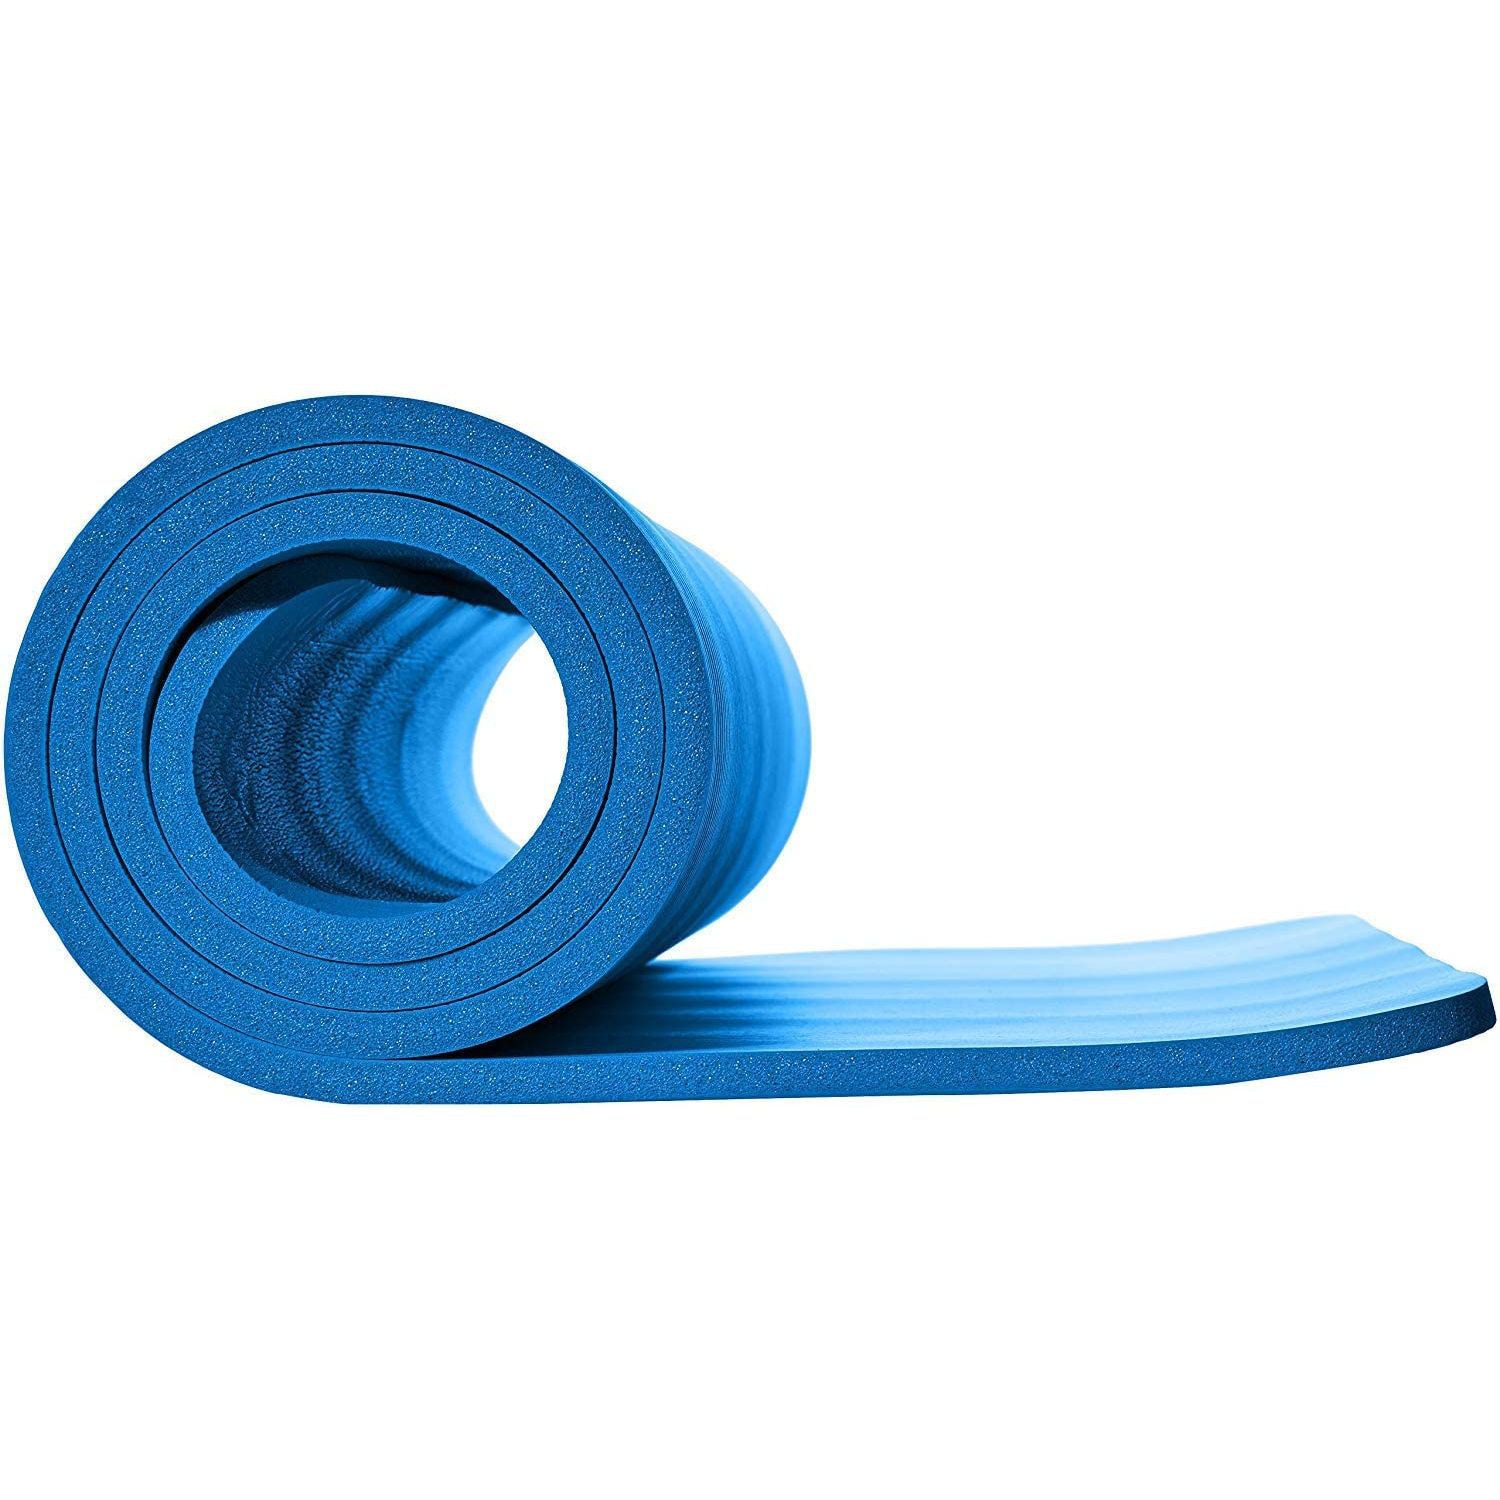 Buy Textured Anti Skid Yoga Mat (Blue) at 36% OFF Online